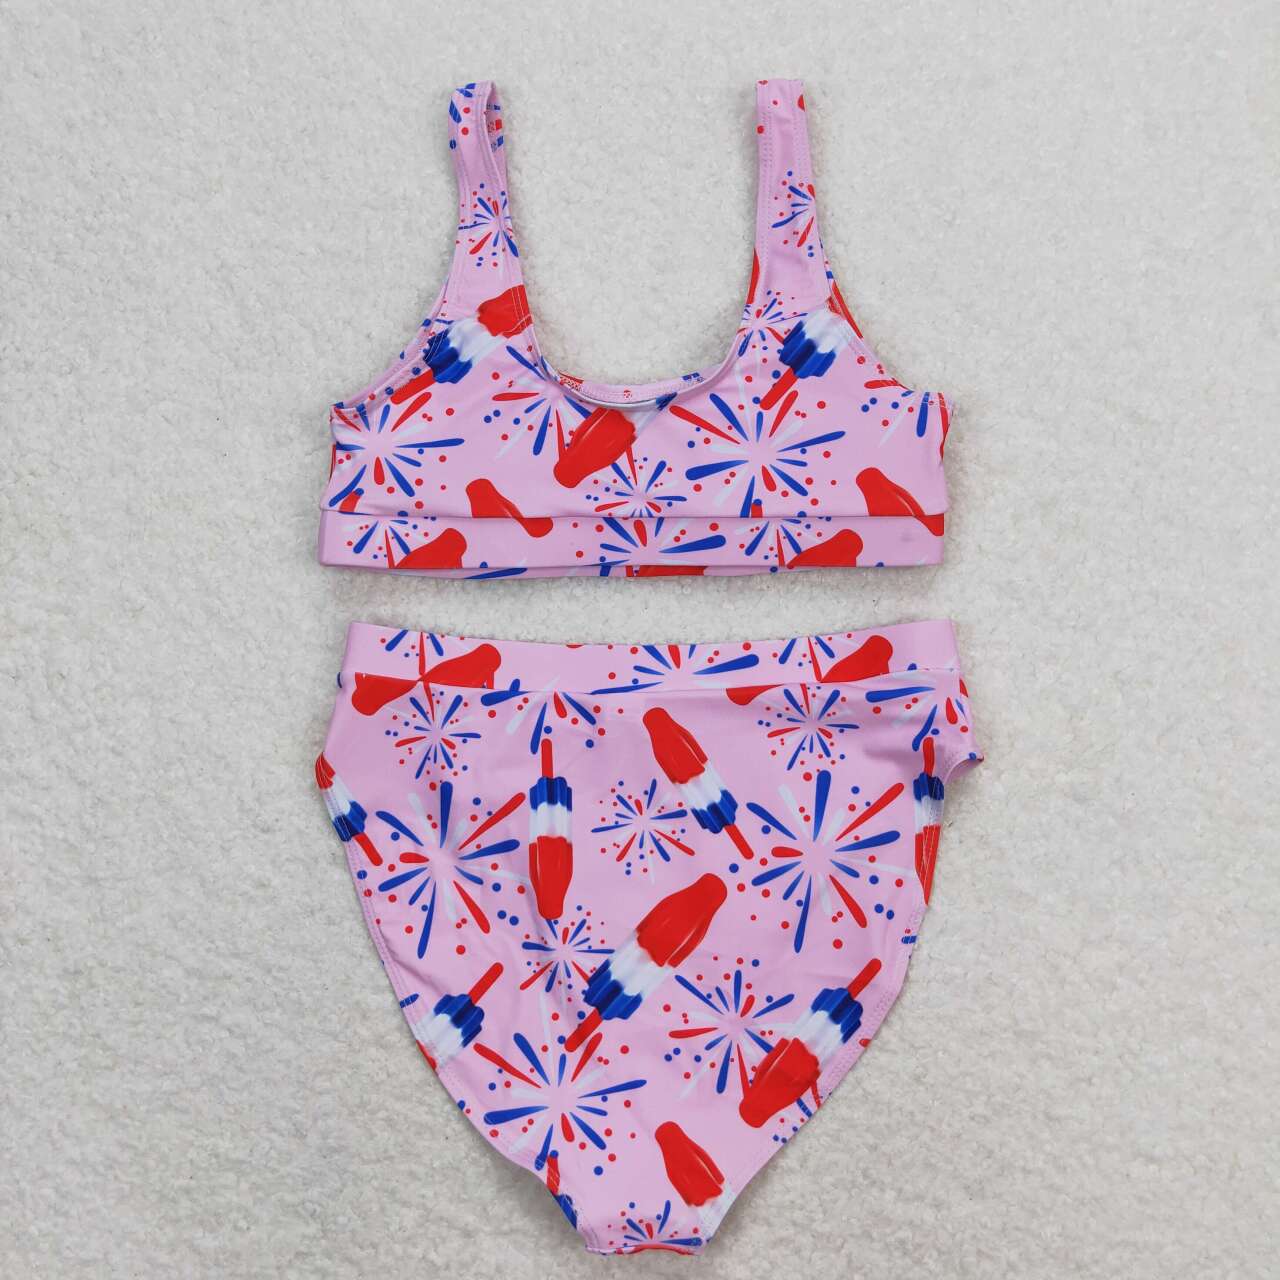 adult women popsicle july 4th two pieces bathing suit